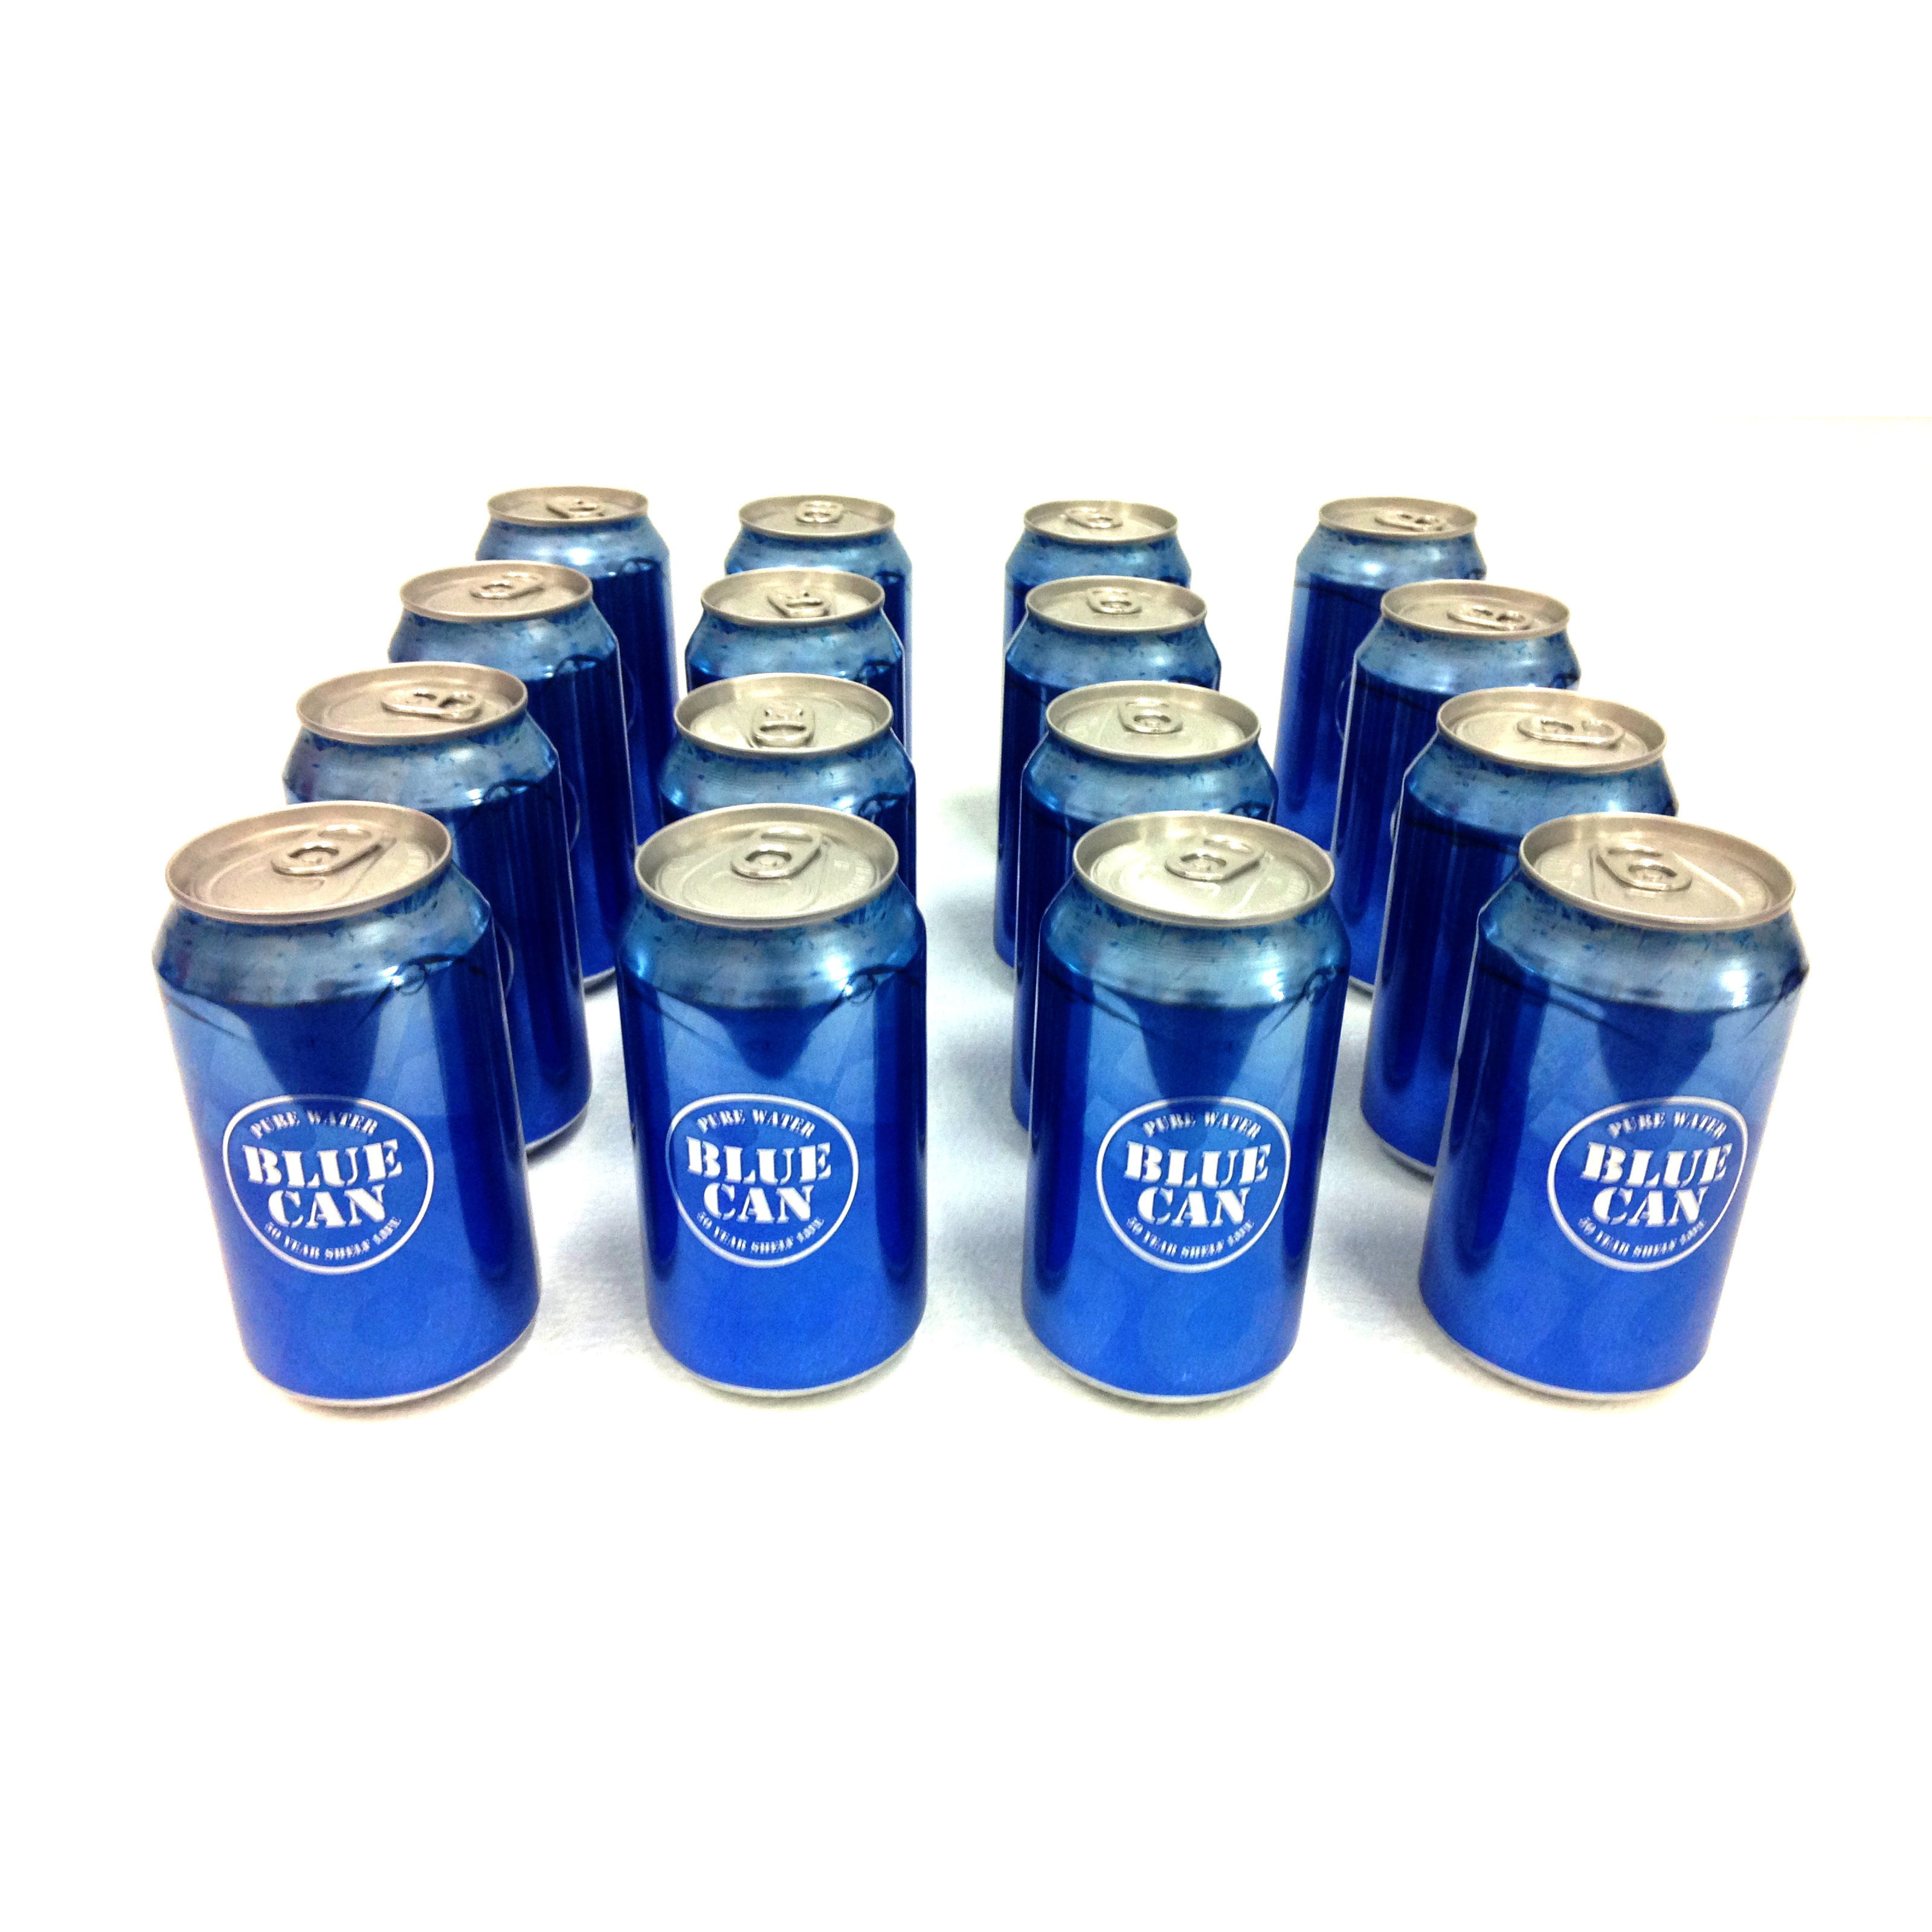 1200 Cans of Blue Can Emergency Survival Drinking Water 50 Year Shelf Life